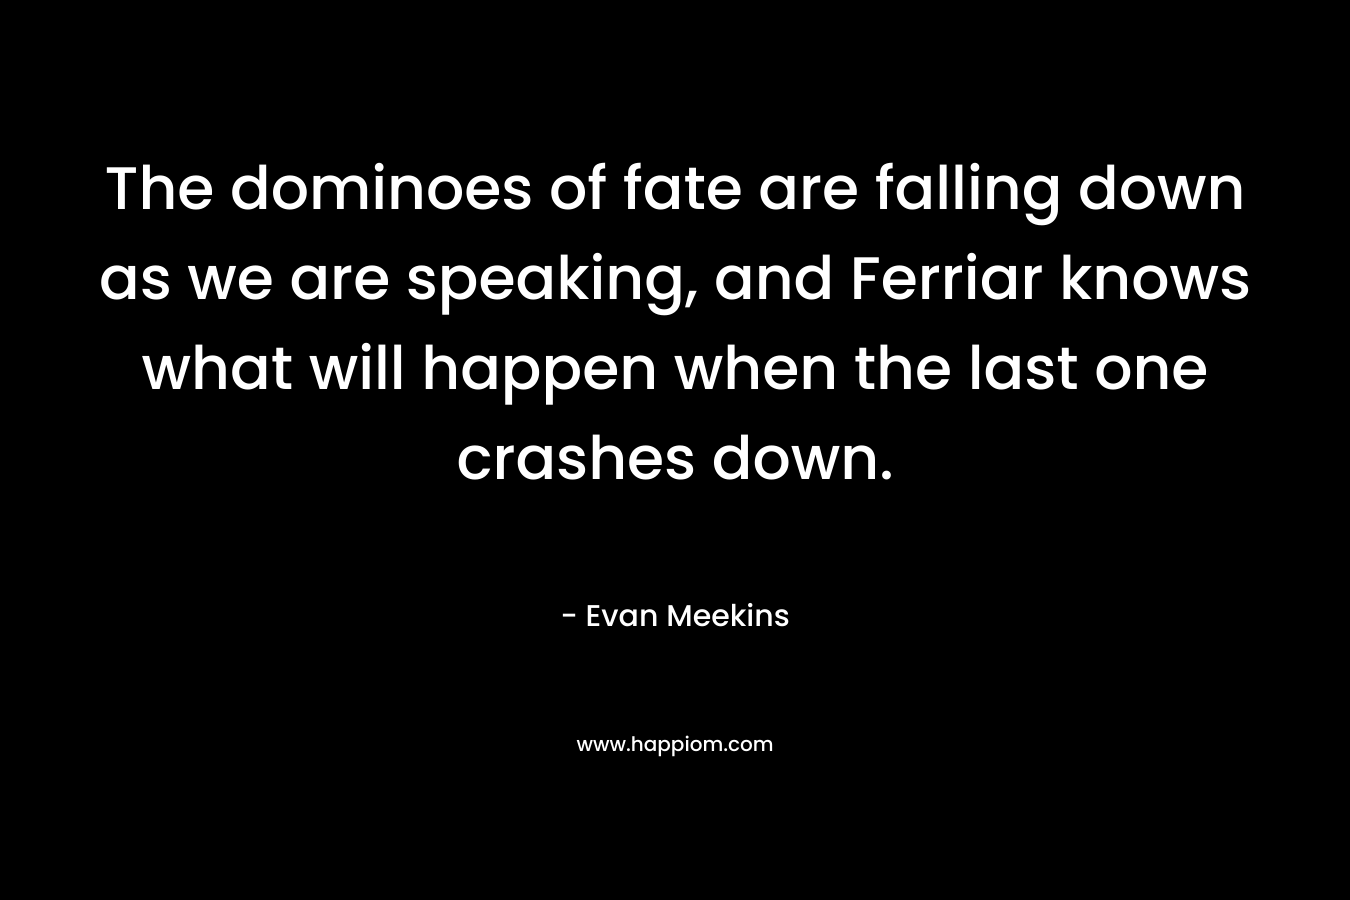 The dominoes of fate are falling down as we are speaking, and Ferriar knows what will happen when the last one crashes down. – Evan Meekins